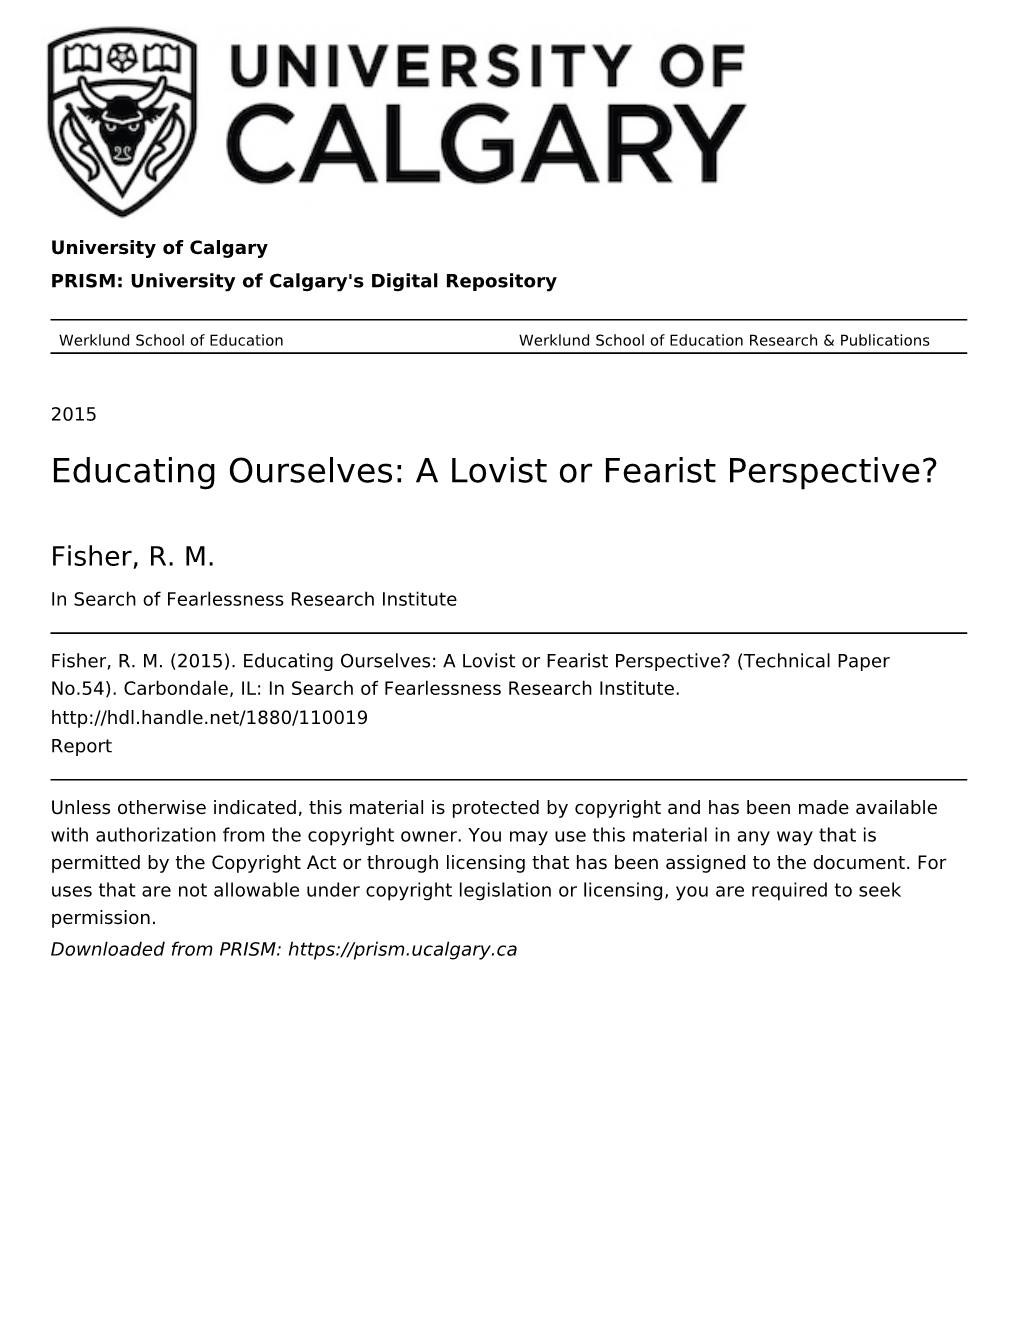 Educating Ourselves: a Lovist Or Fearist Perspective?